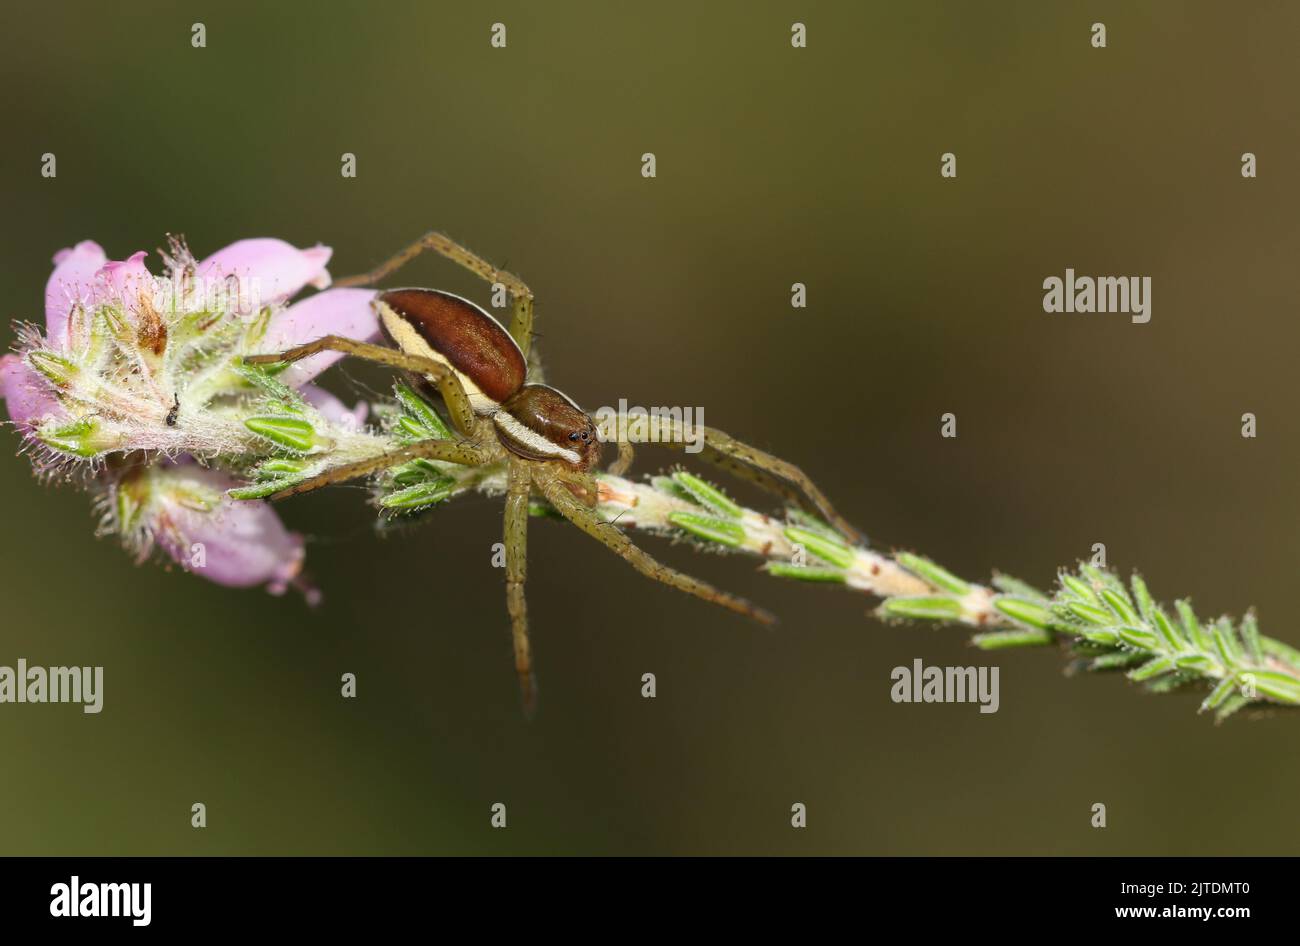 A rare hunting juvenile Raft Spider, Dolomedes fimbriatus, on a heather plant growing at the edge of a bog. Stock Photo